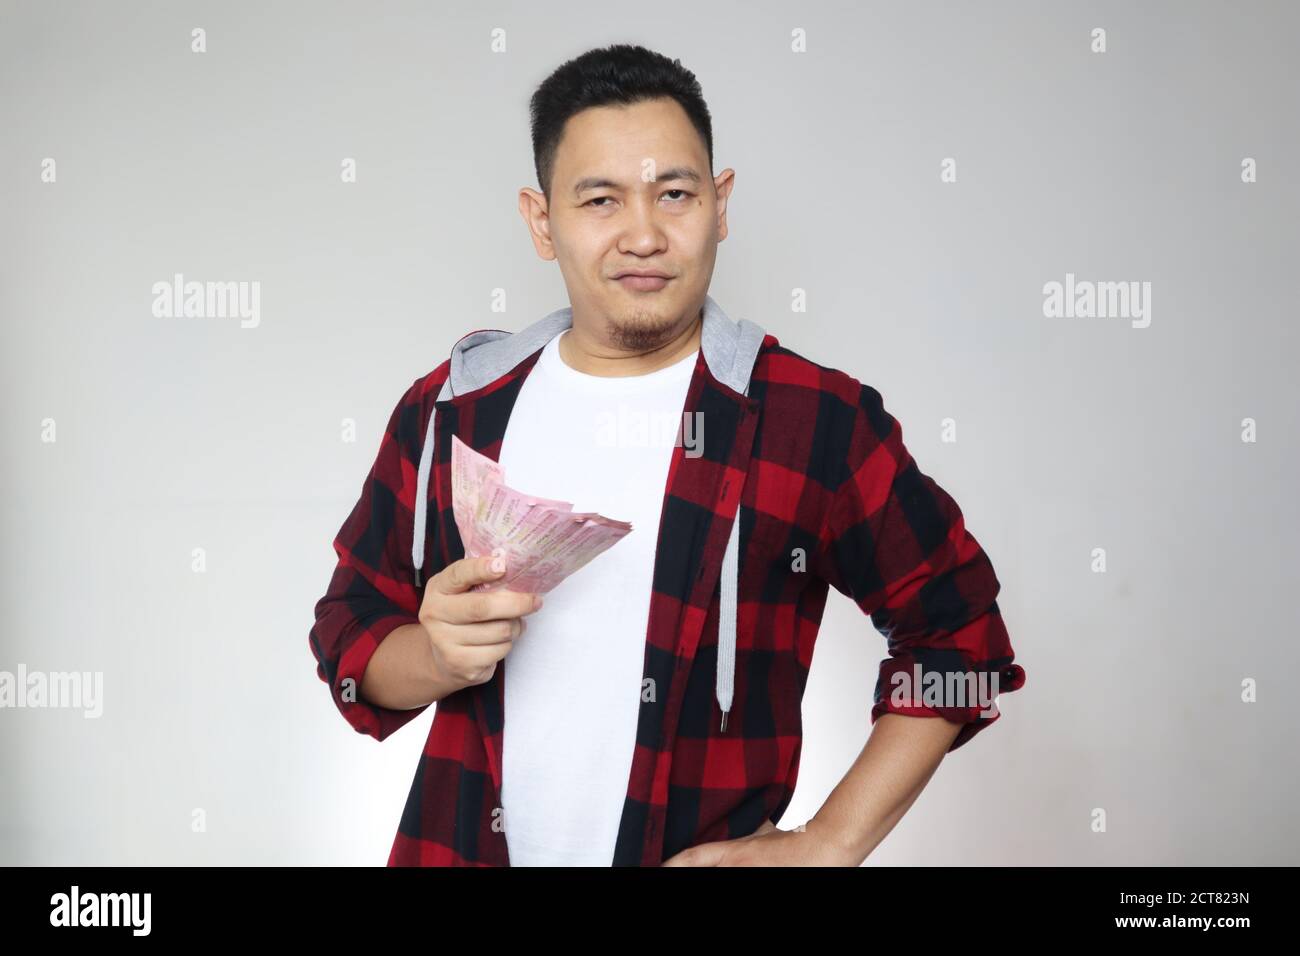 Portrait of happy young Indonesian man holding rupiah money, smiling laughing winning gesture, over white background Stock Photo